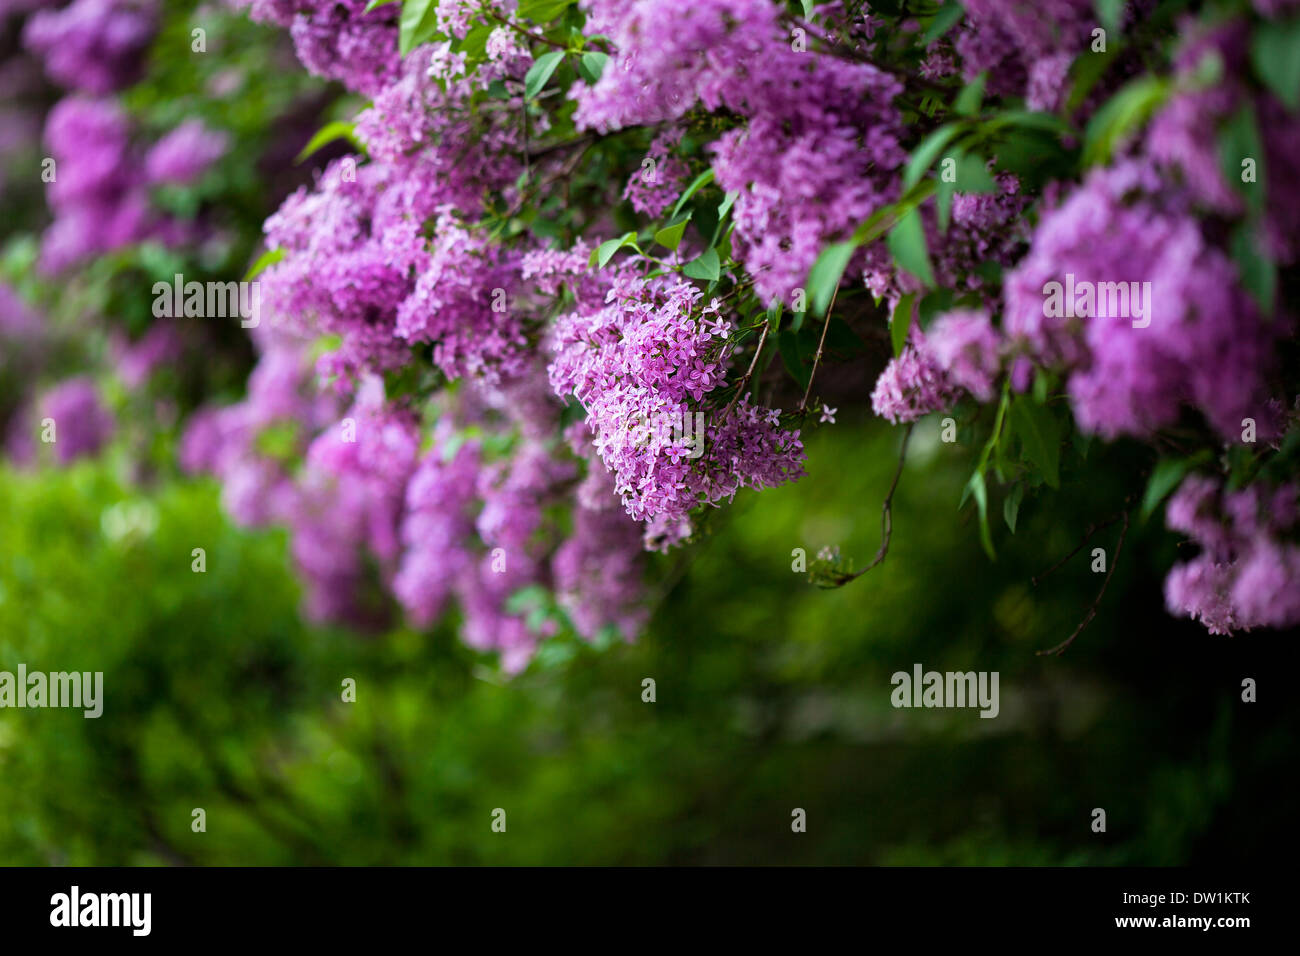 bunch of violet lilac flower (shallow DOF) Stock Photo